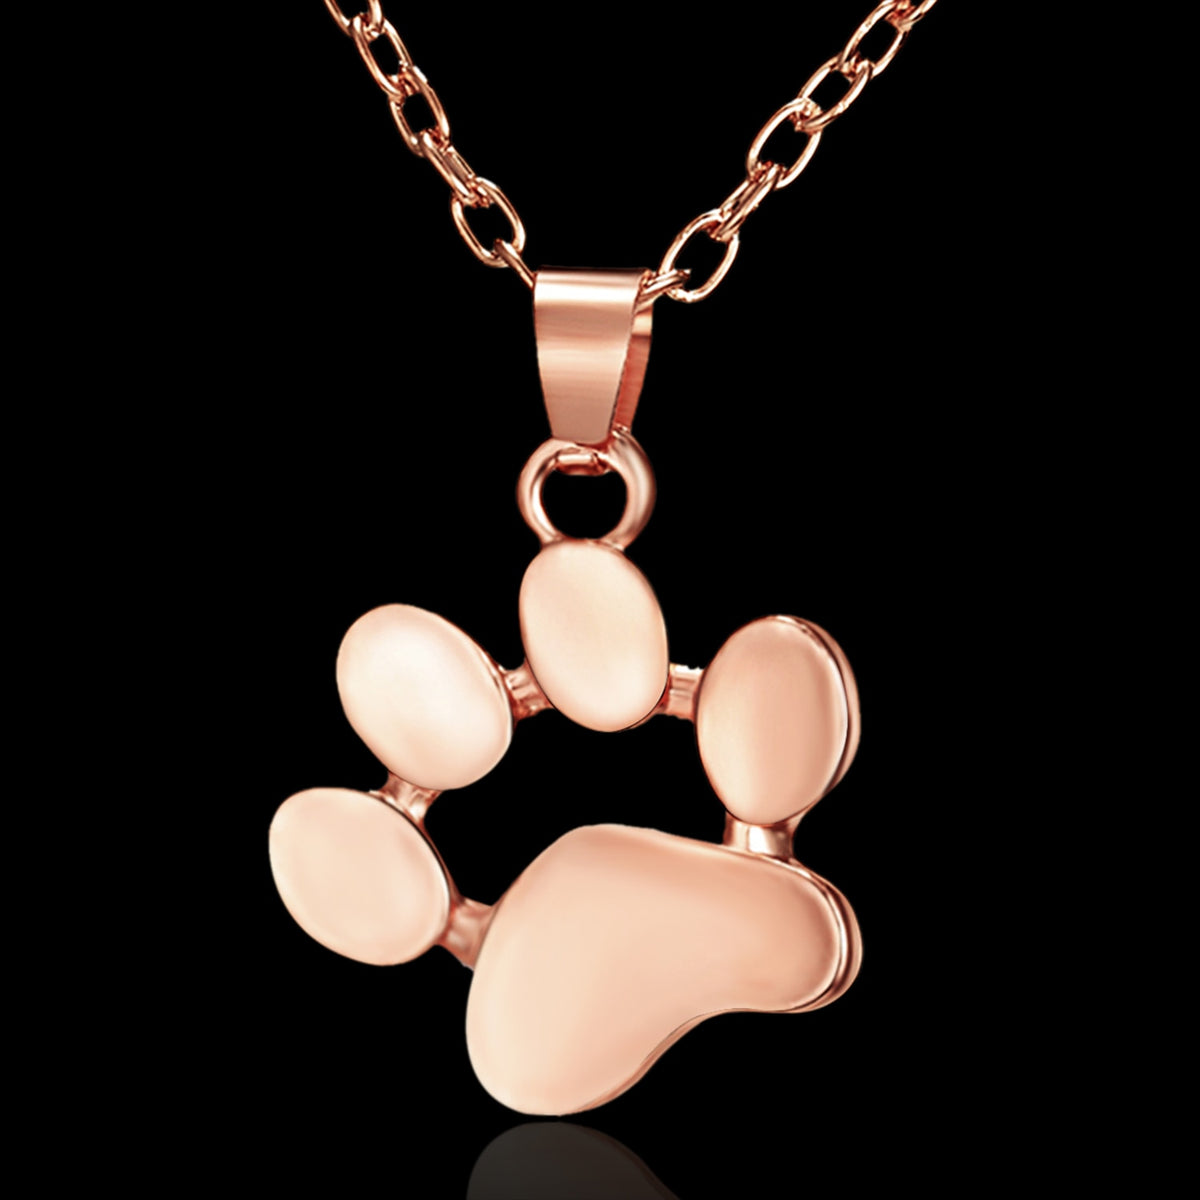 Silver Color Dog Cat Necklace For Women Jewelry Accessories Cute Animal Paw Pet Choker Necklace Pendant Footprints